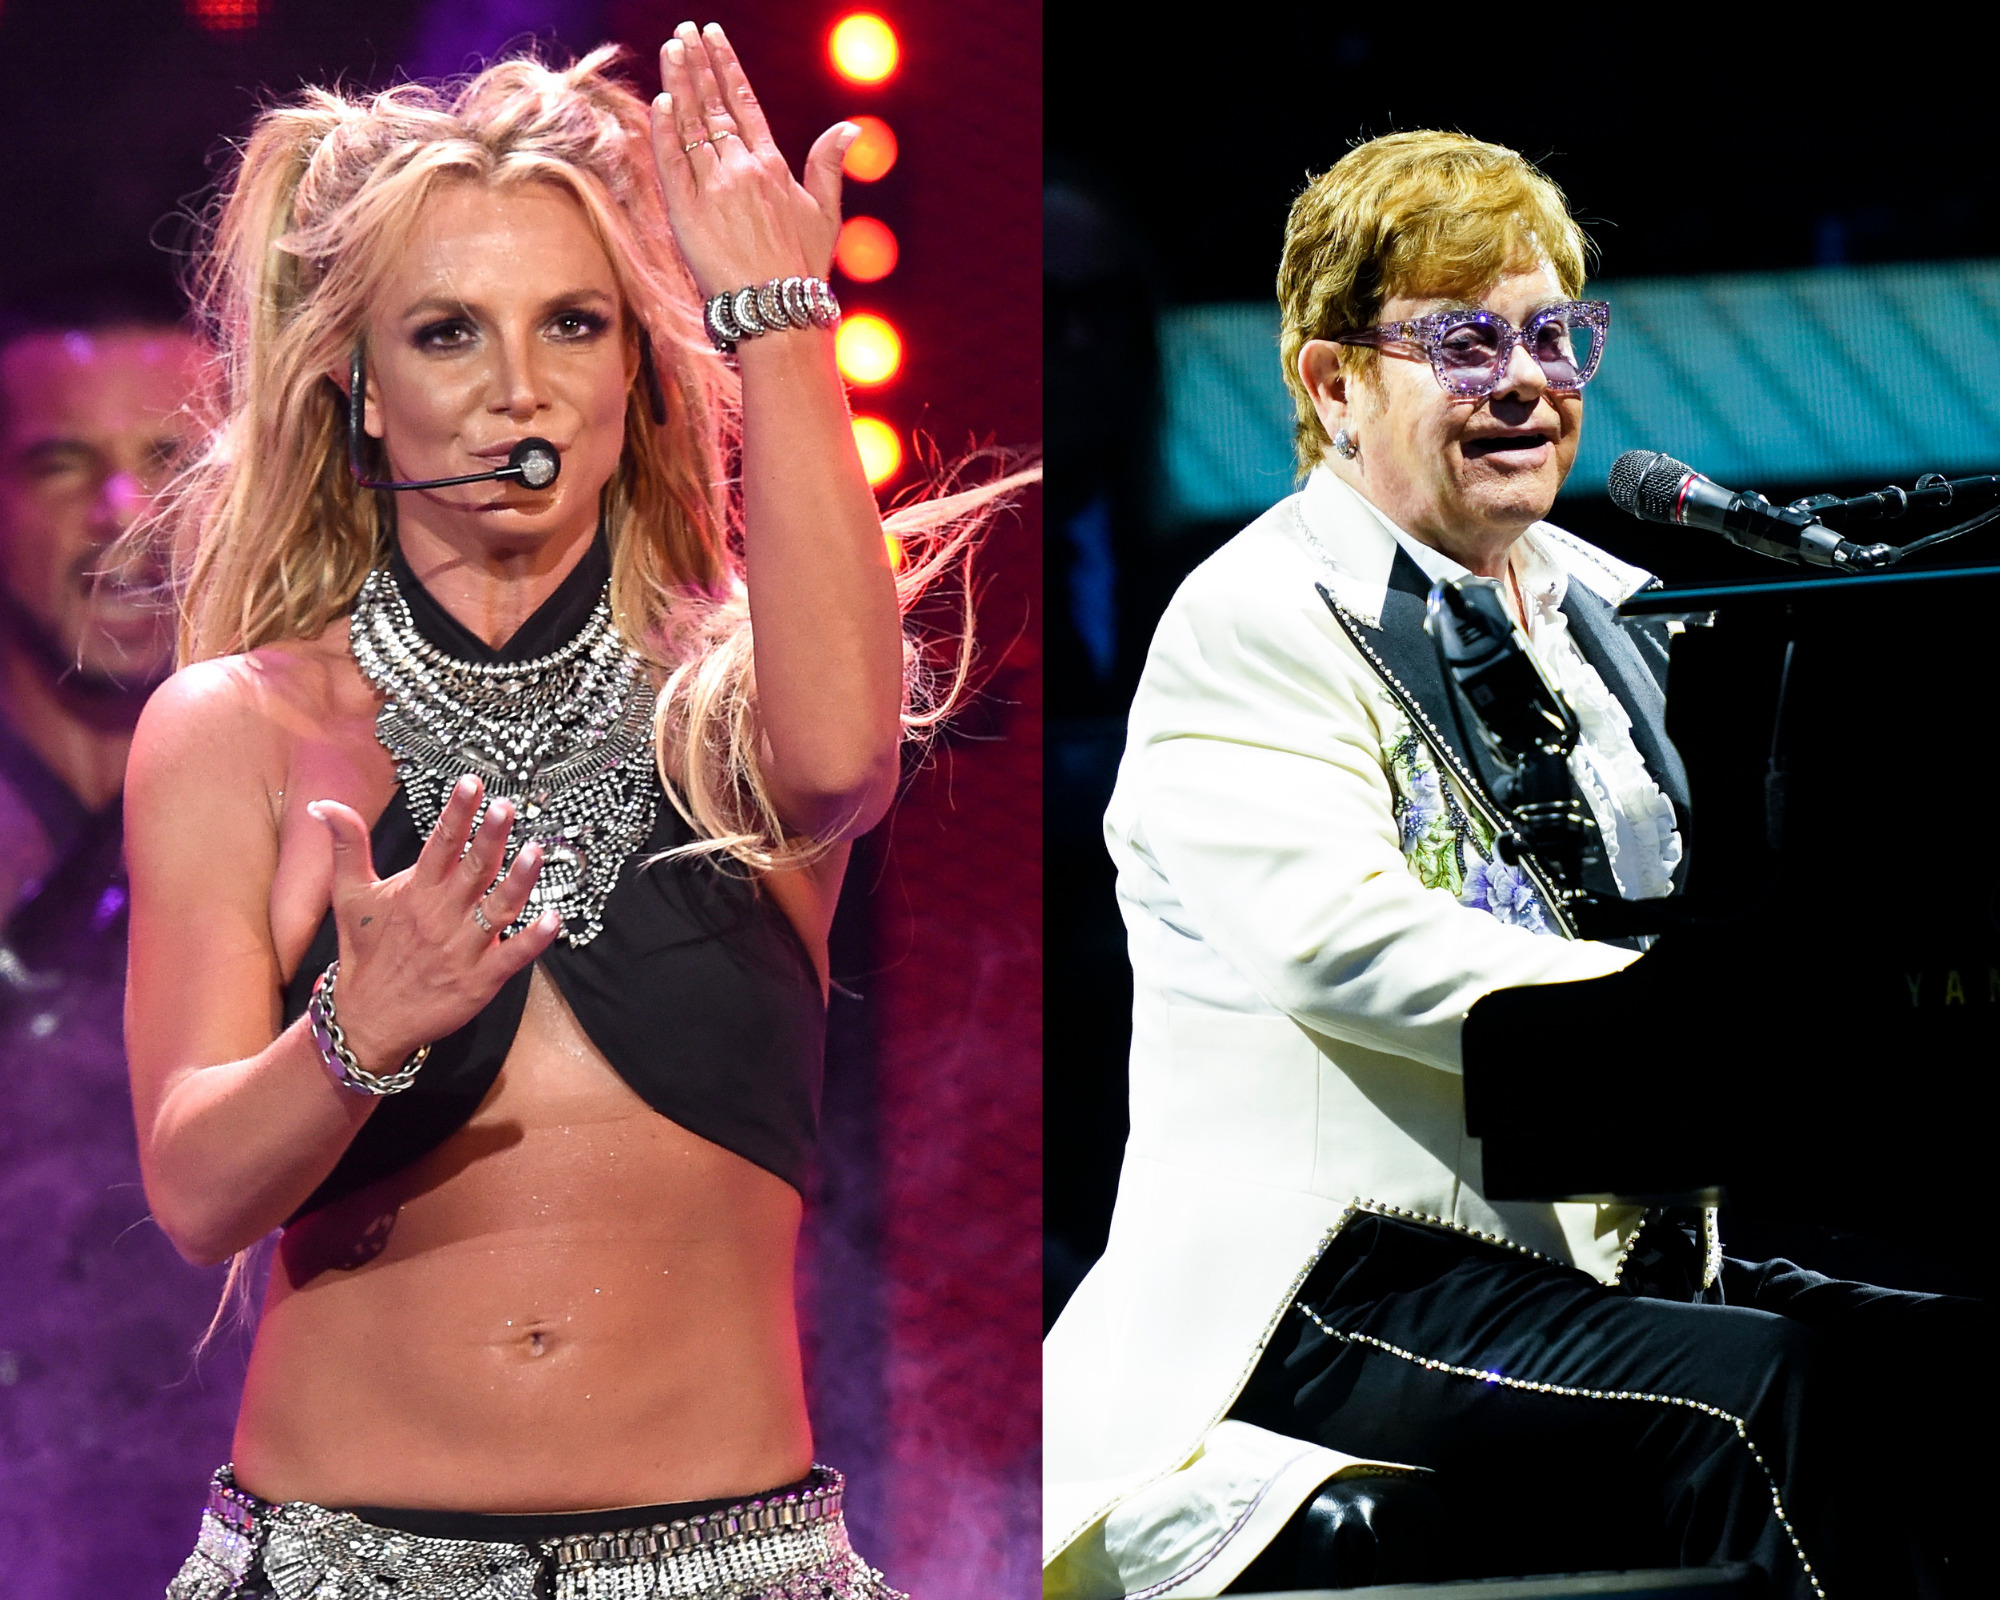 Britney Spears returns to music with Elton John duet: What We Know